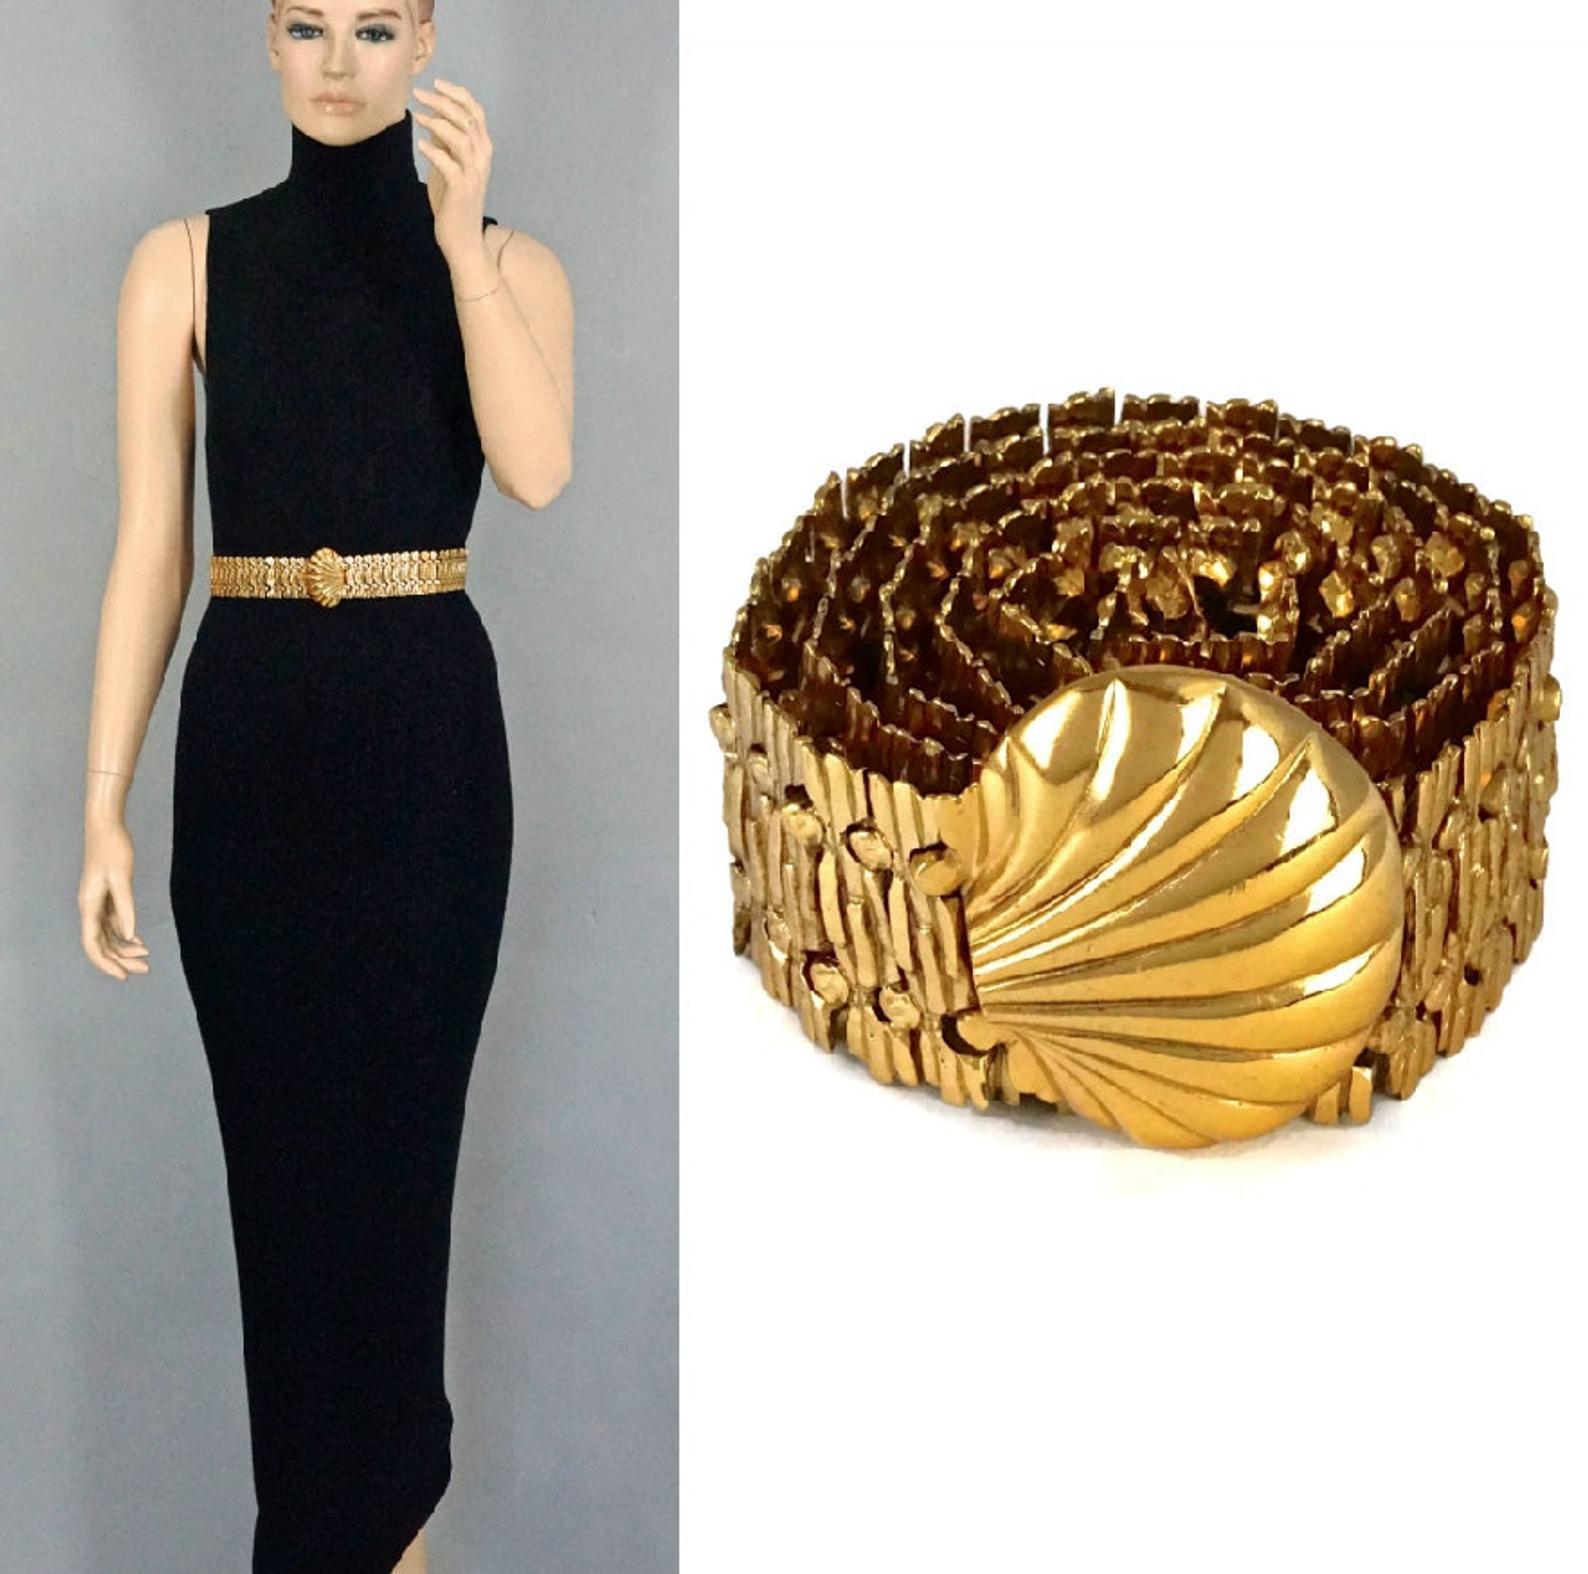 Vintage YVES SAINT LAURENT Ysl Shell Textured Metal Belt

Measurements:
Height: 2.16 inches (5.5 cm)
Wearable Length: 28.15 inches, 28.74 inches and 29.33 inches (71.5 cm, 73 cm to 74.5 cm)
Total Length: 33.85 inches (86 cm) including shell
Weight: